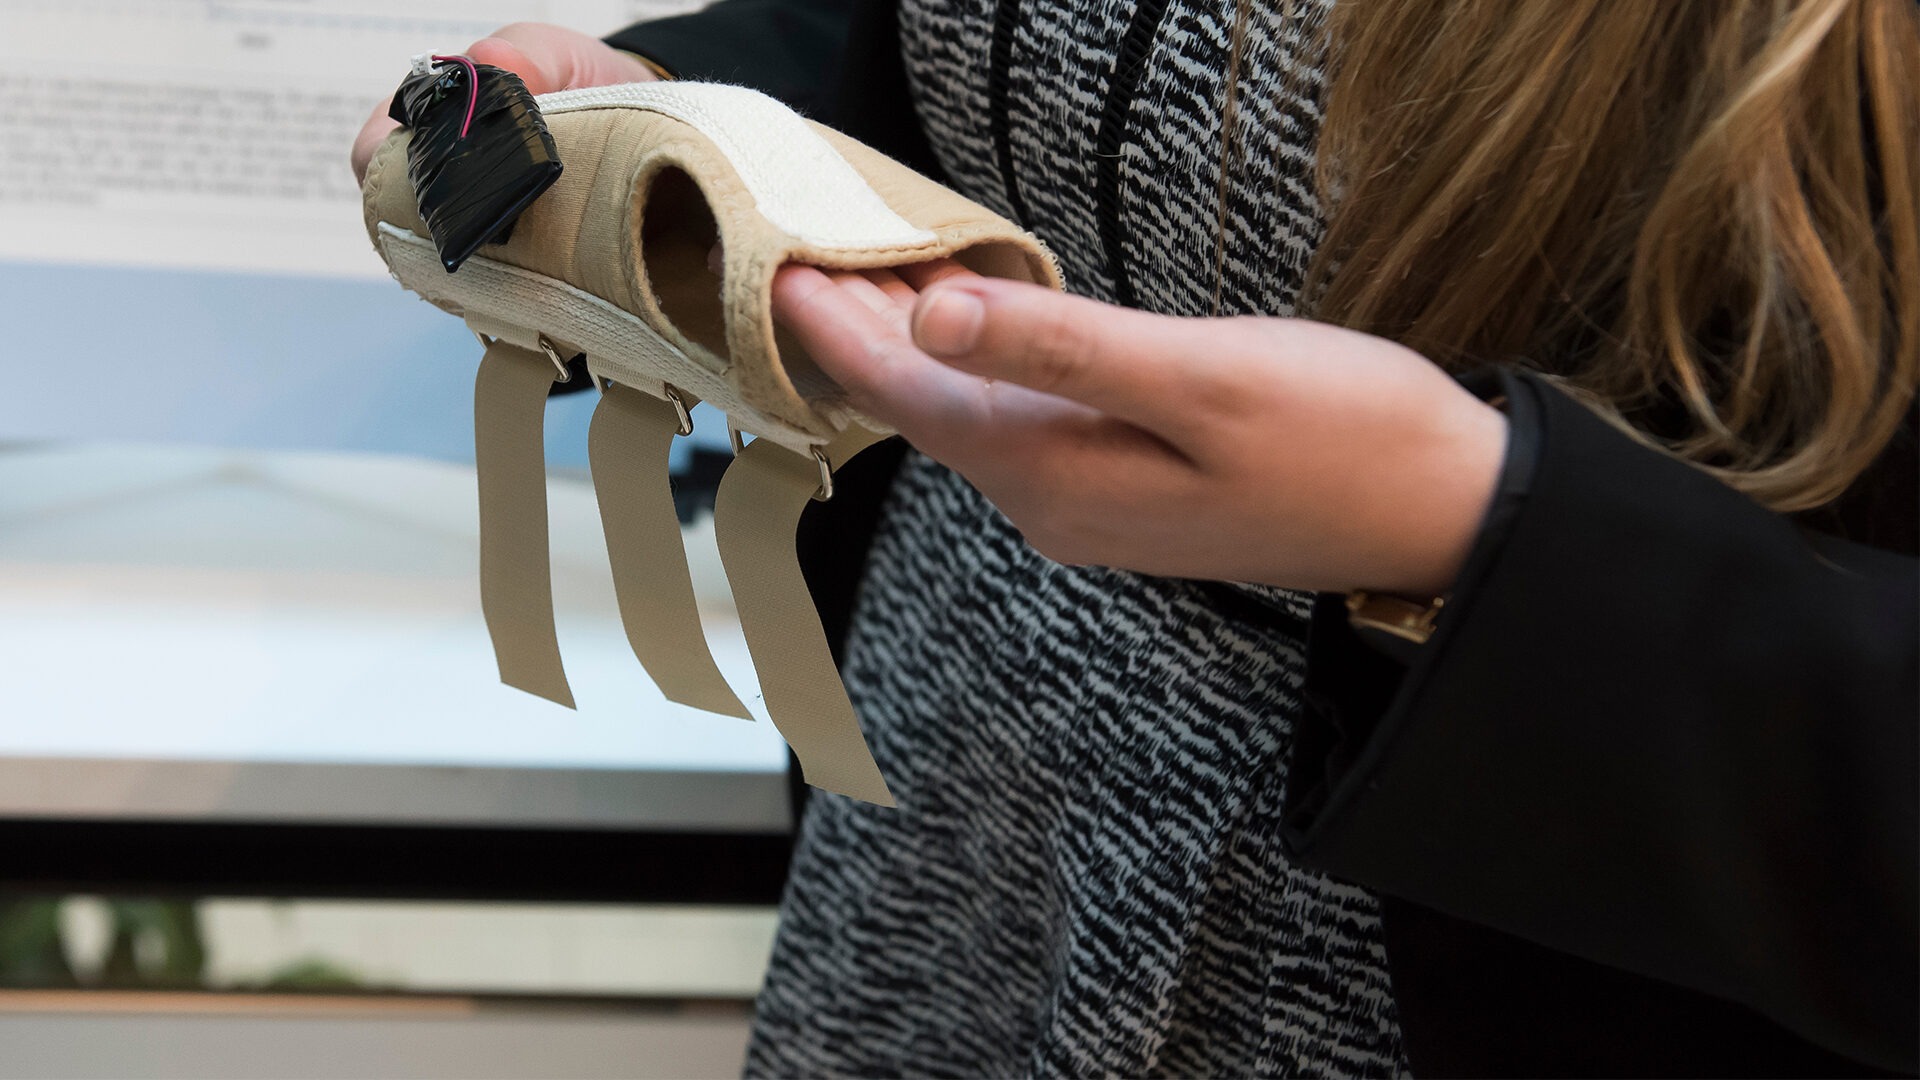 A pair of hands holds up a prototype that looks like a wrist brace with a device attached to it.